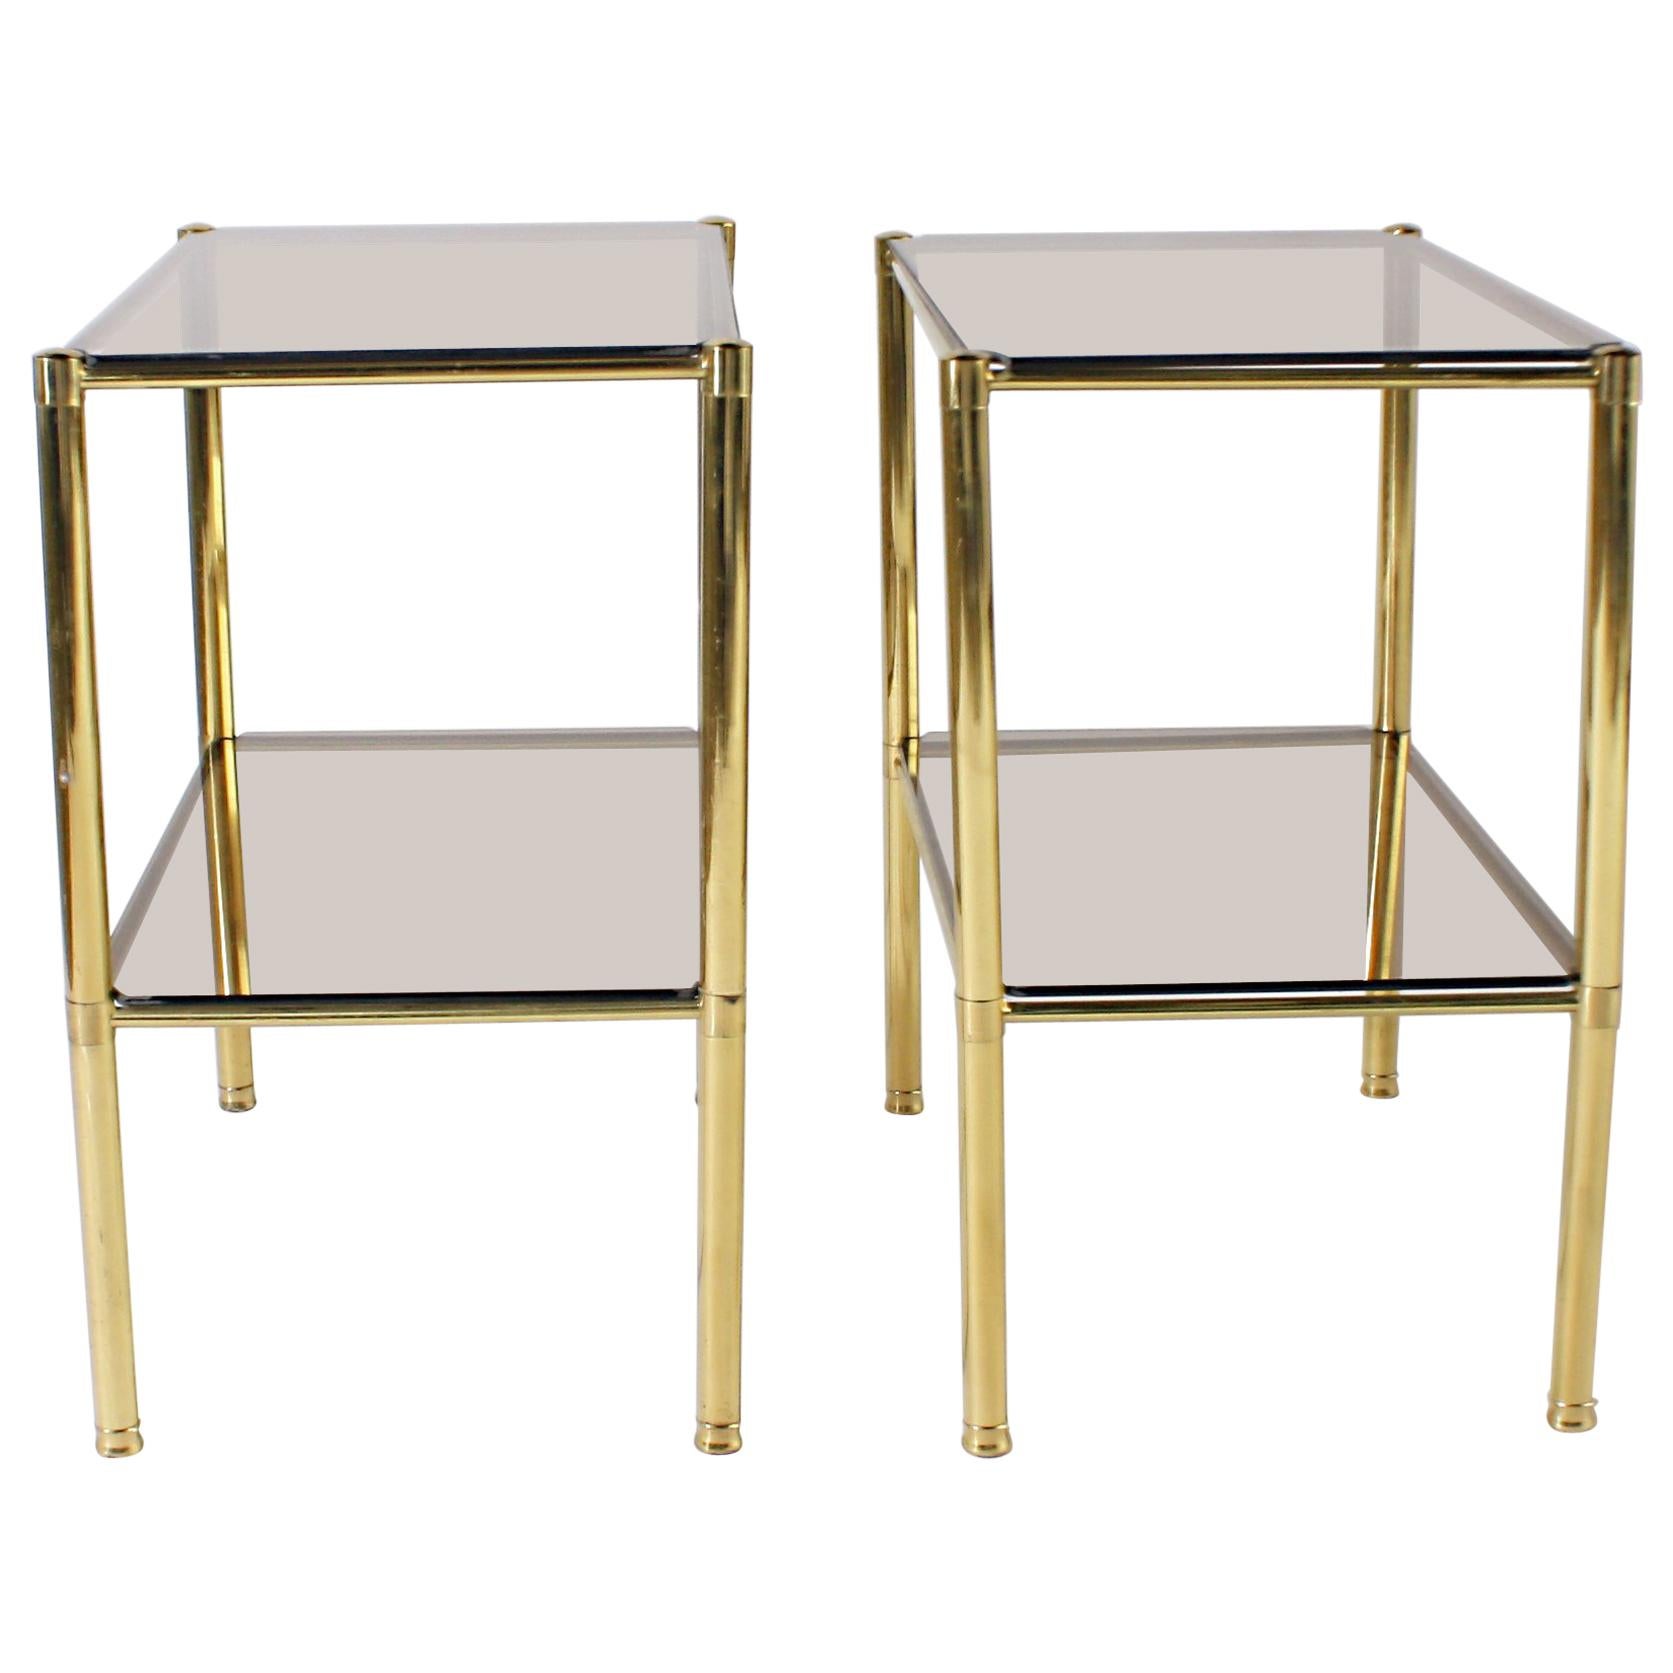 Pair of Brass Side Tables with Smoky Glass Tops, circa 1950